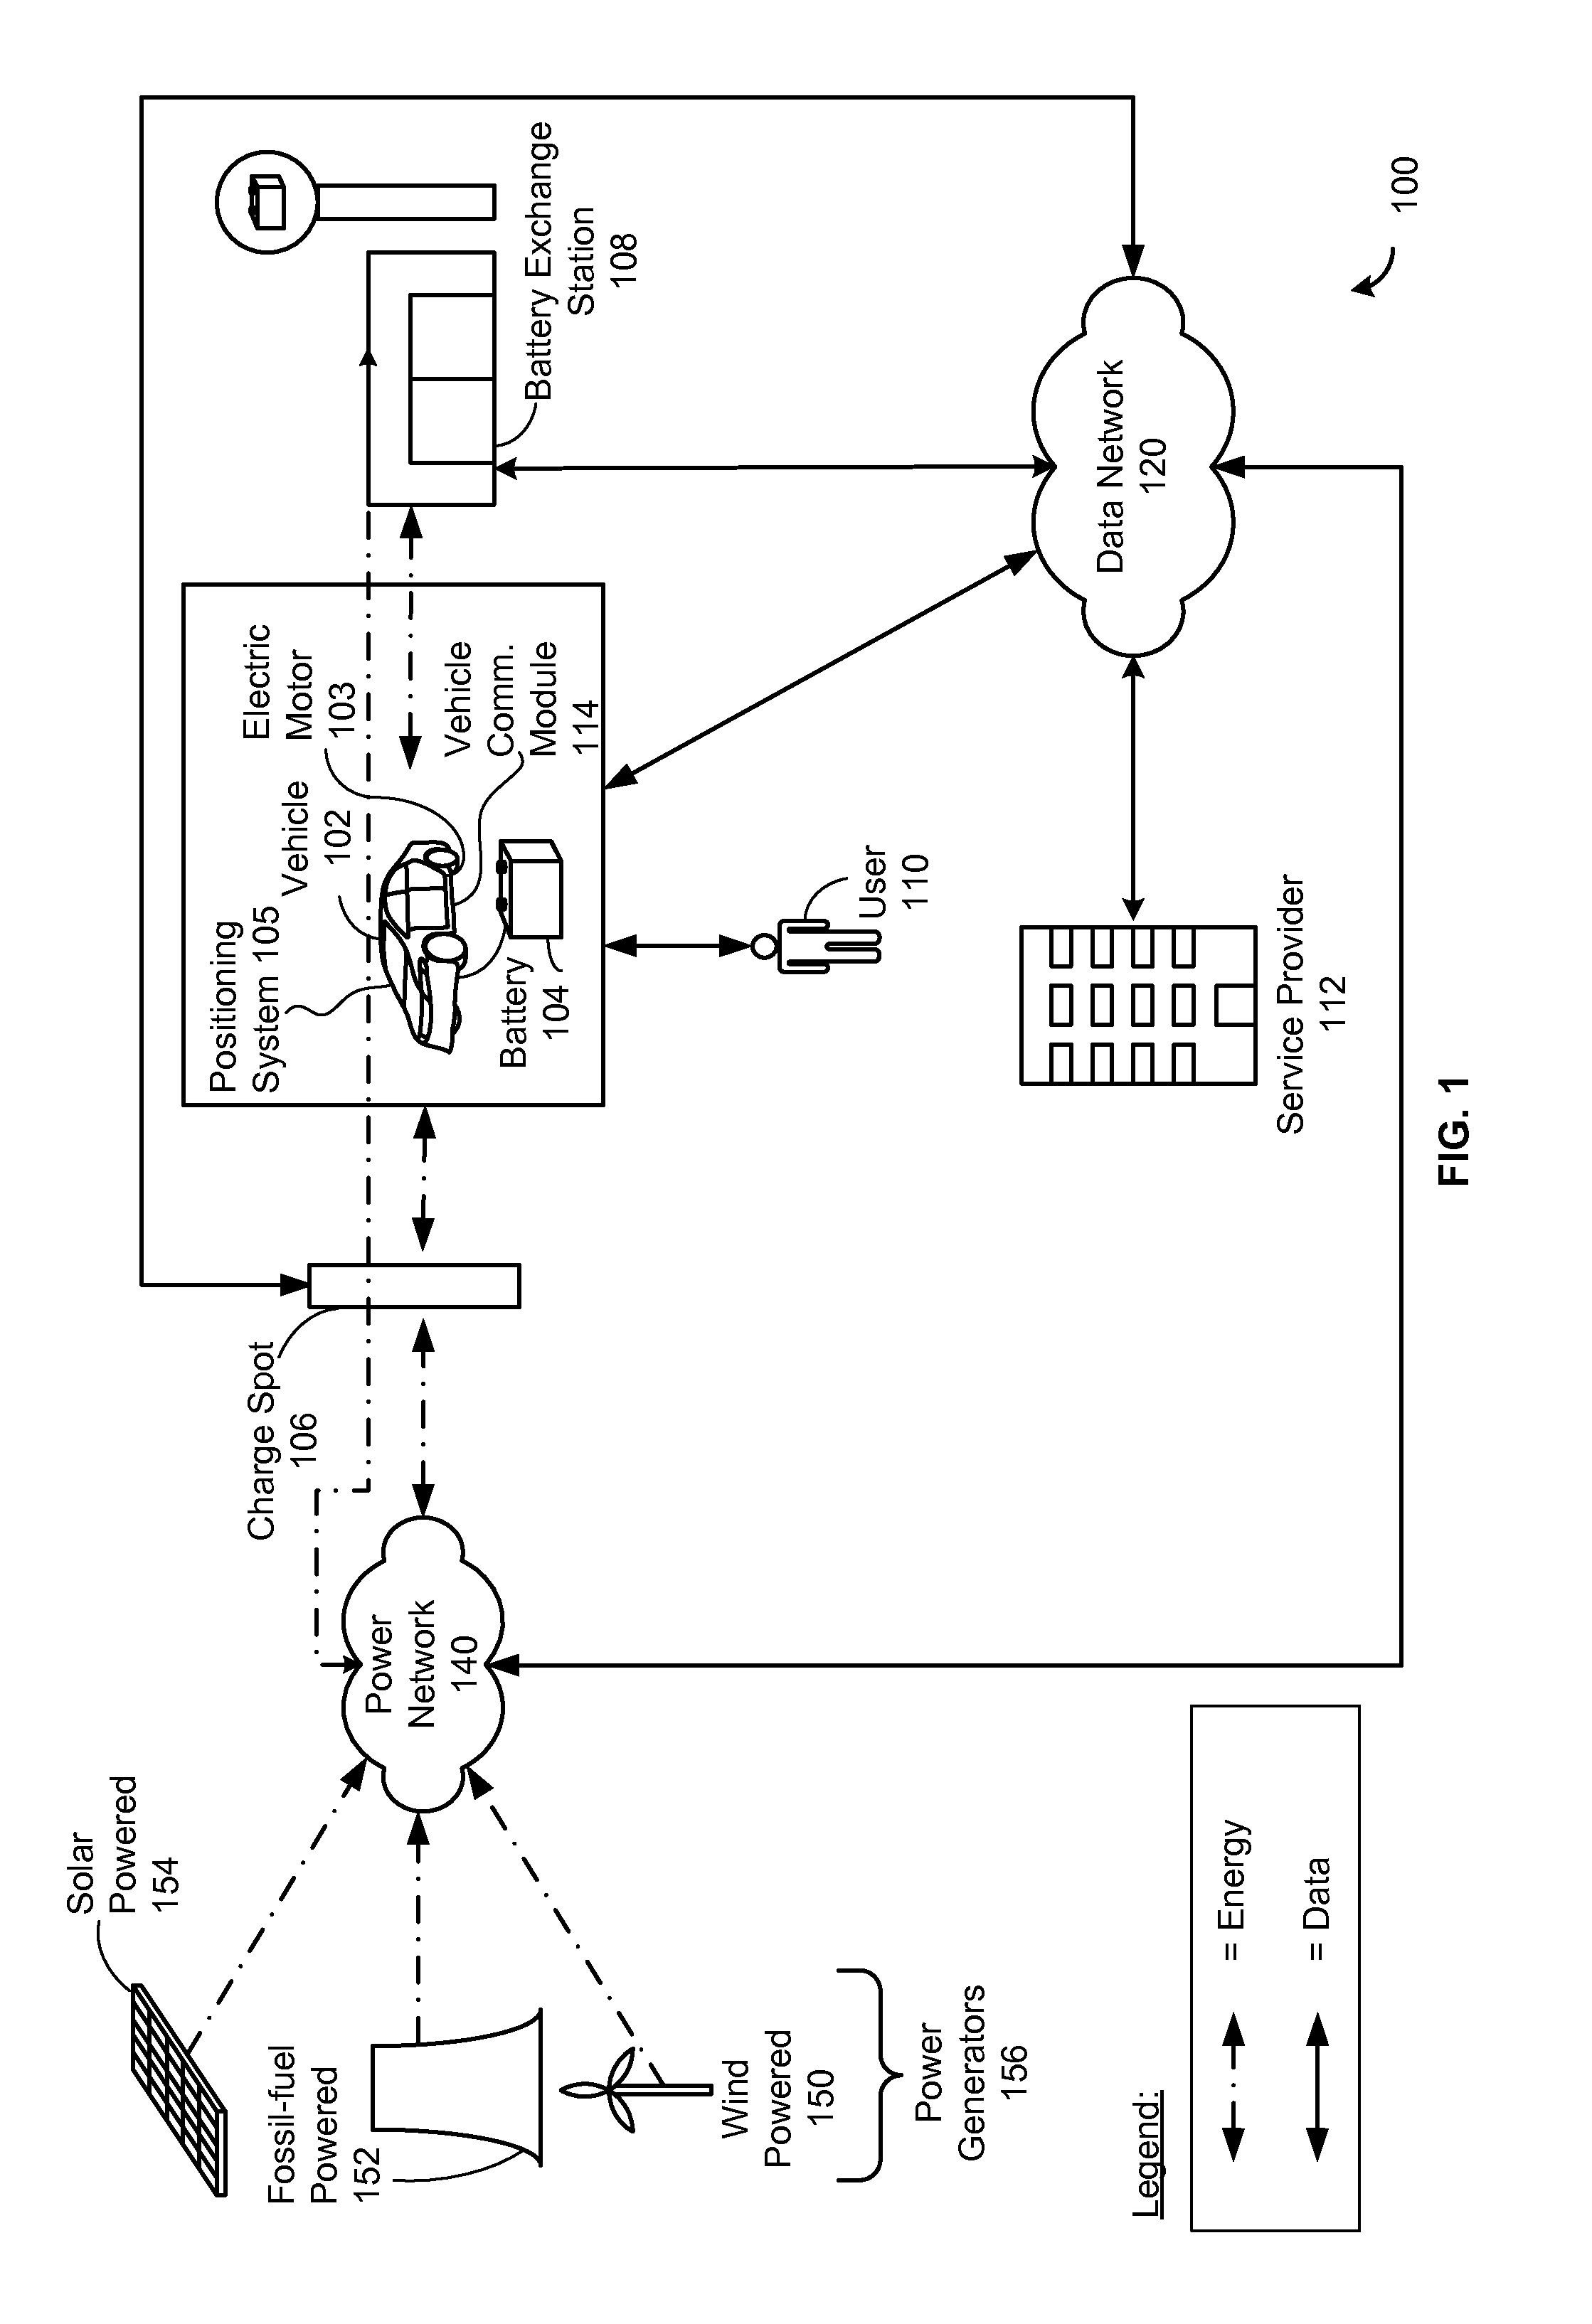 Staged deployment for electrical charge spots